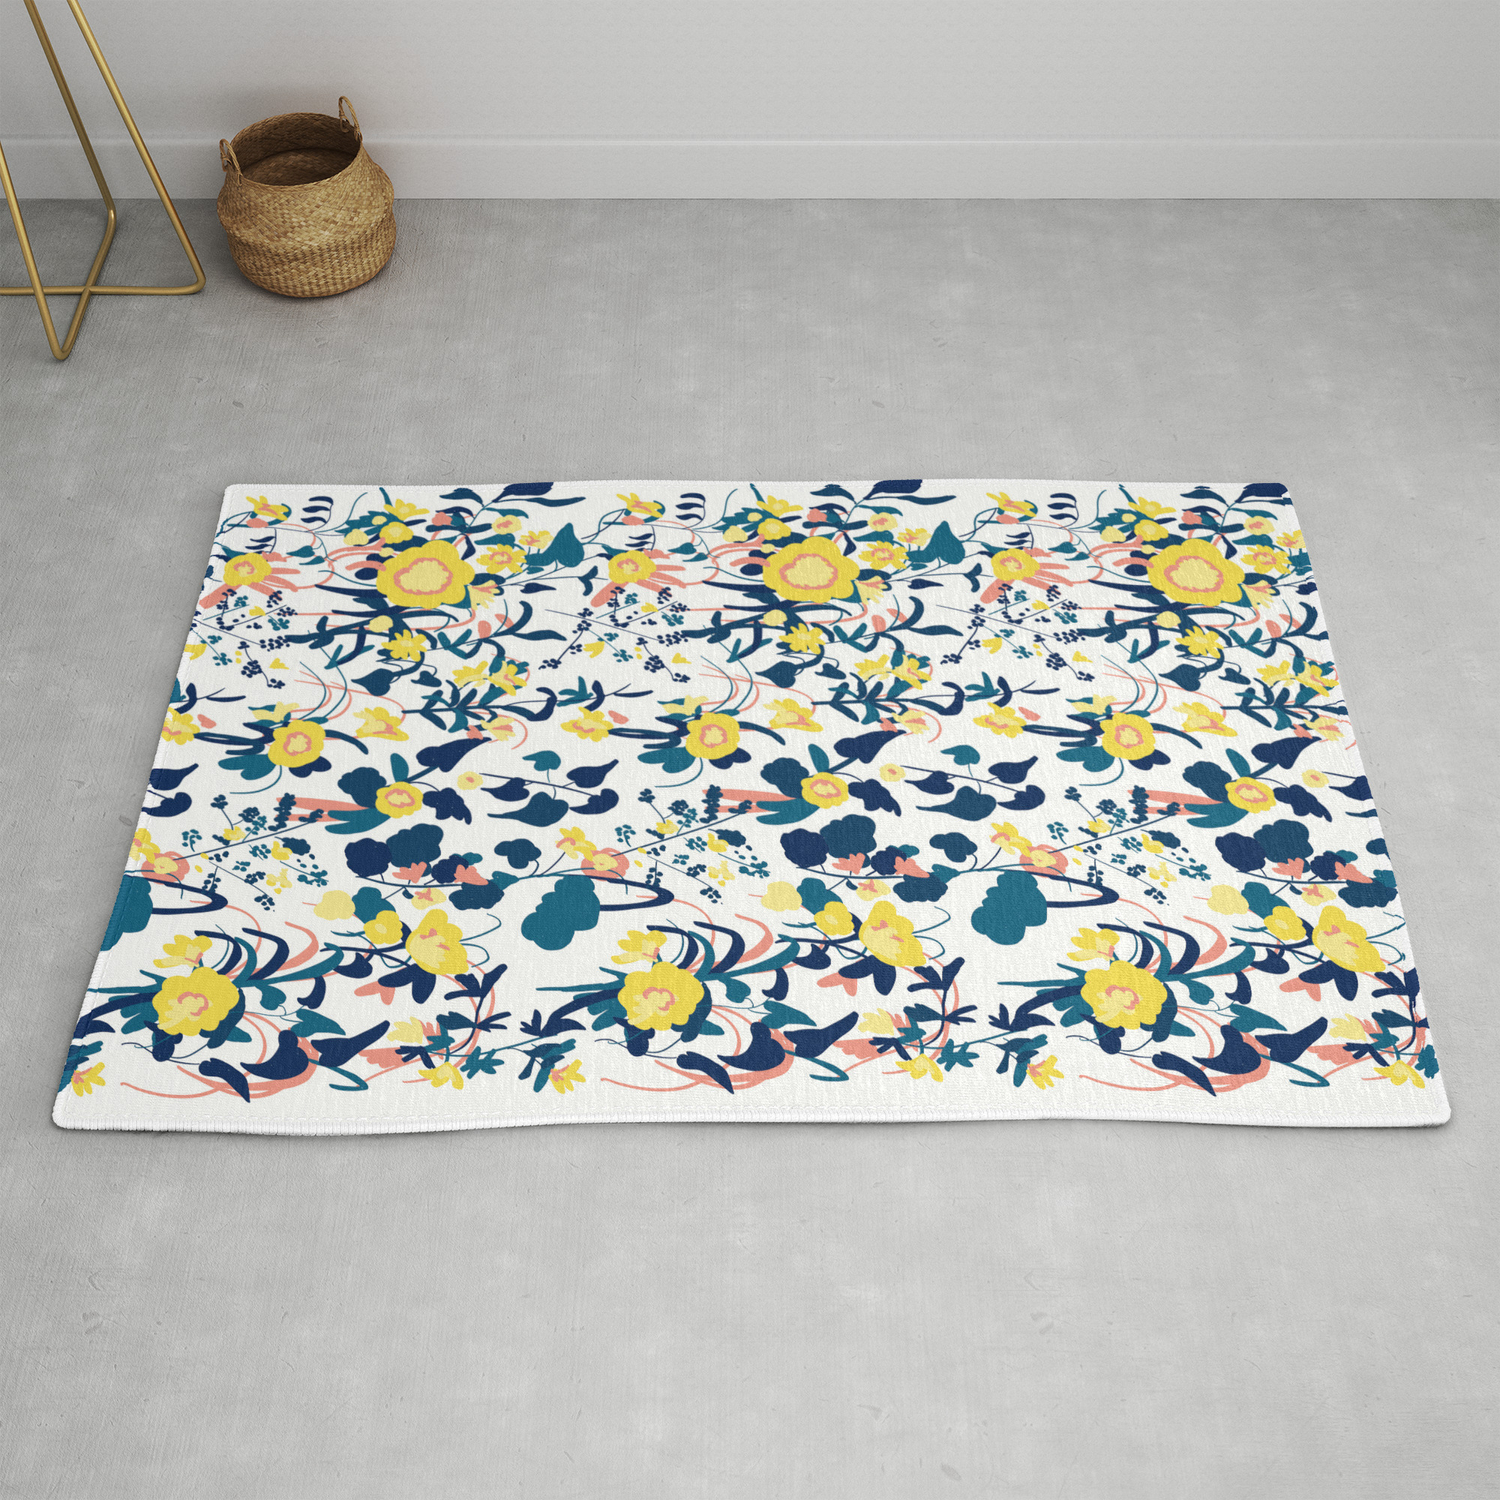 Ercup Yellow Salmon Pink And Navy, Navy Blue And White Rug